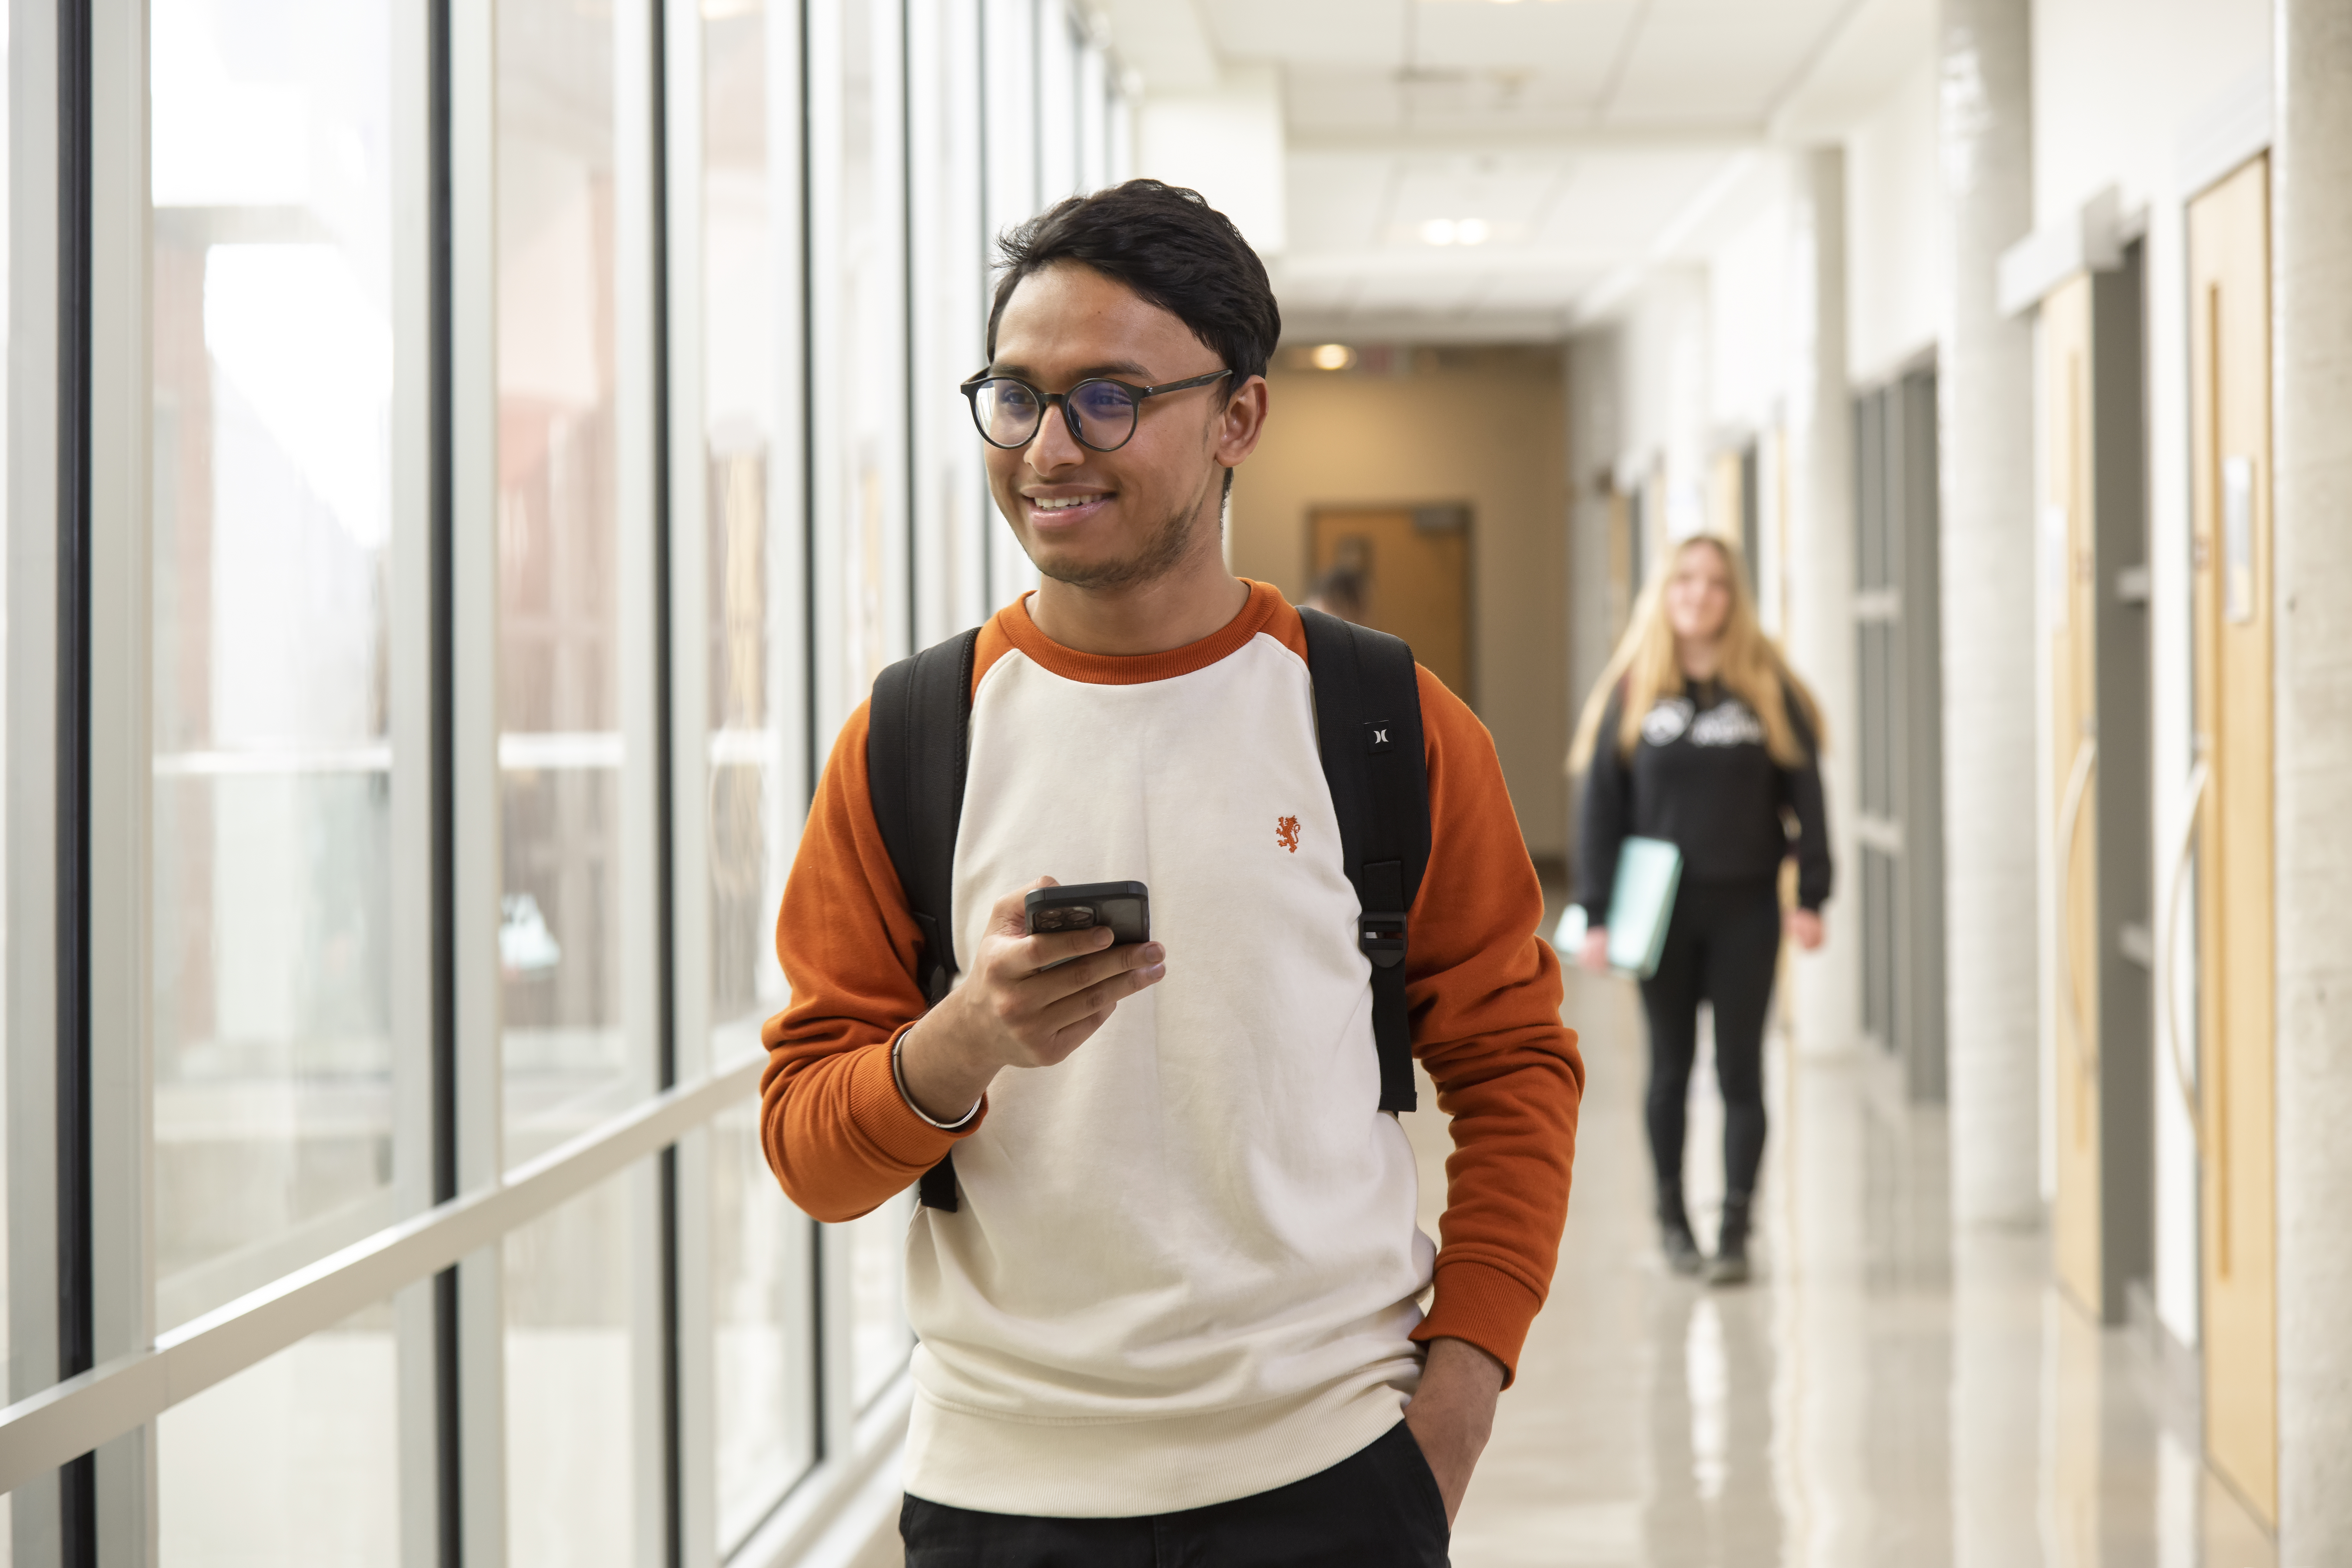 Student walking down hallway smiling with phone in hand. 